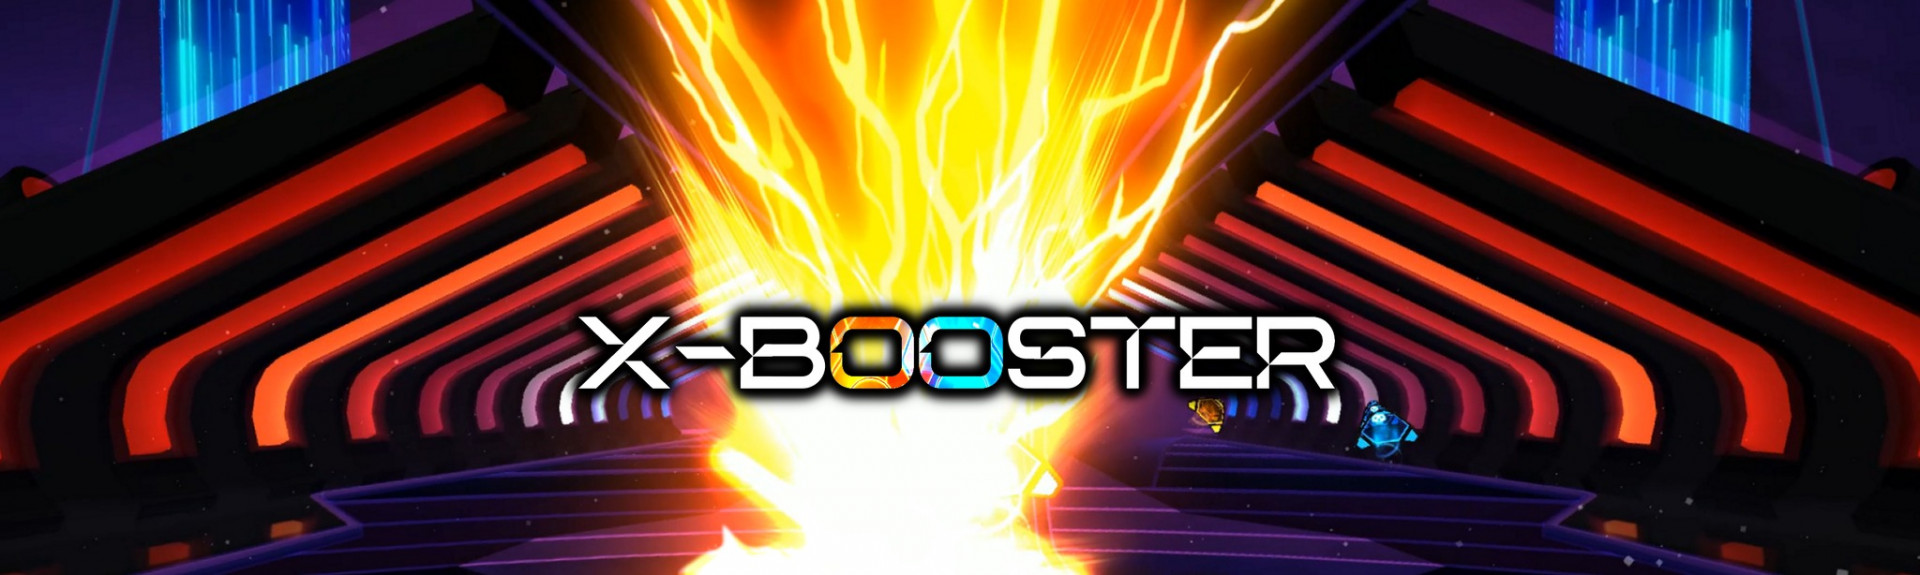 X-BOOSTER DEMO